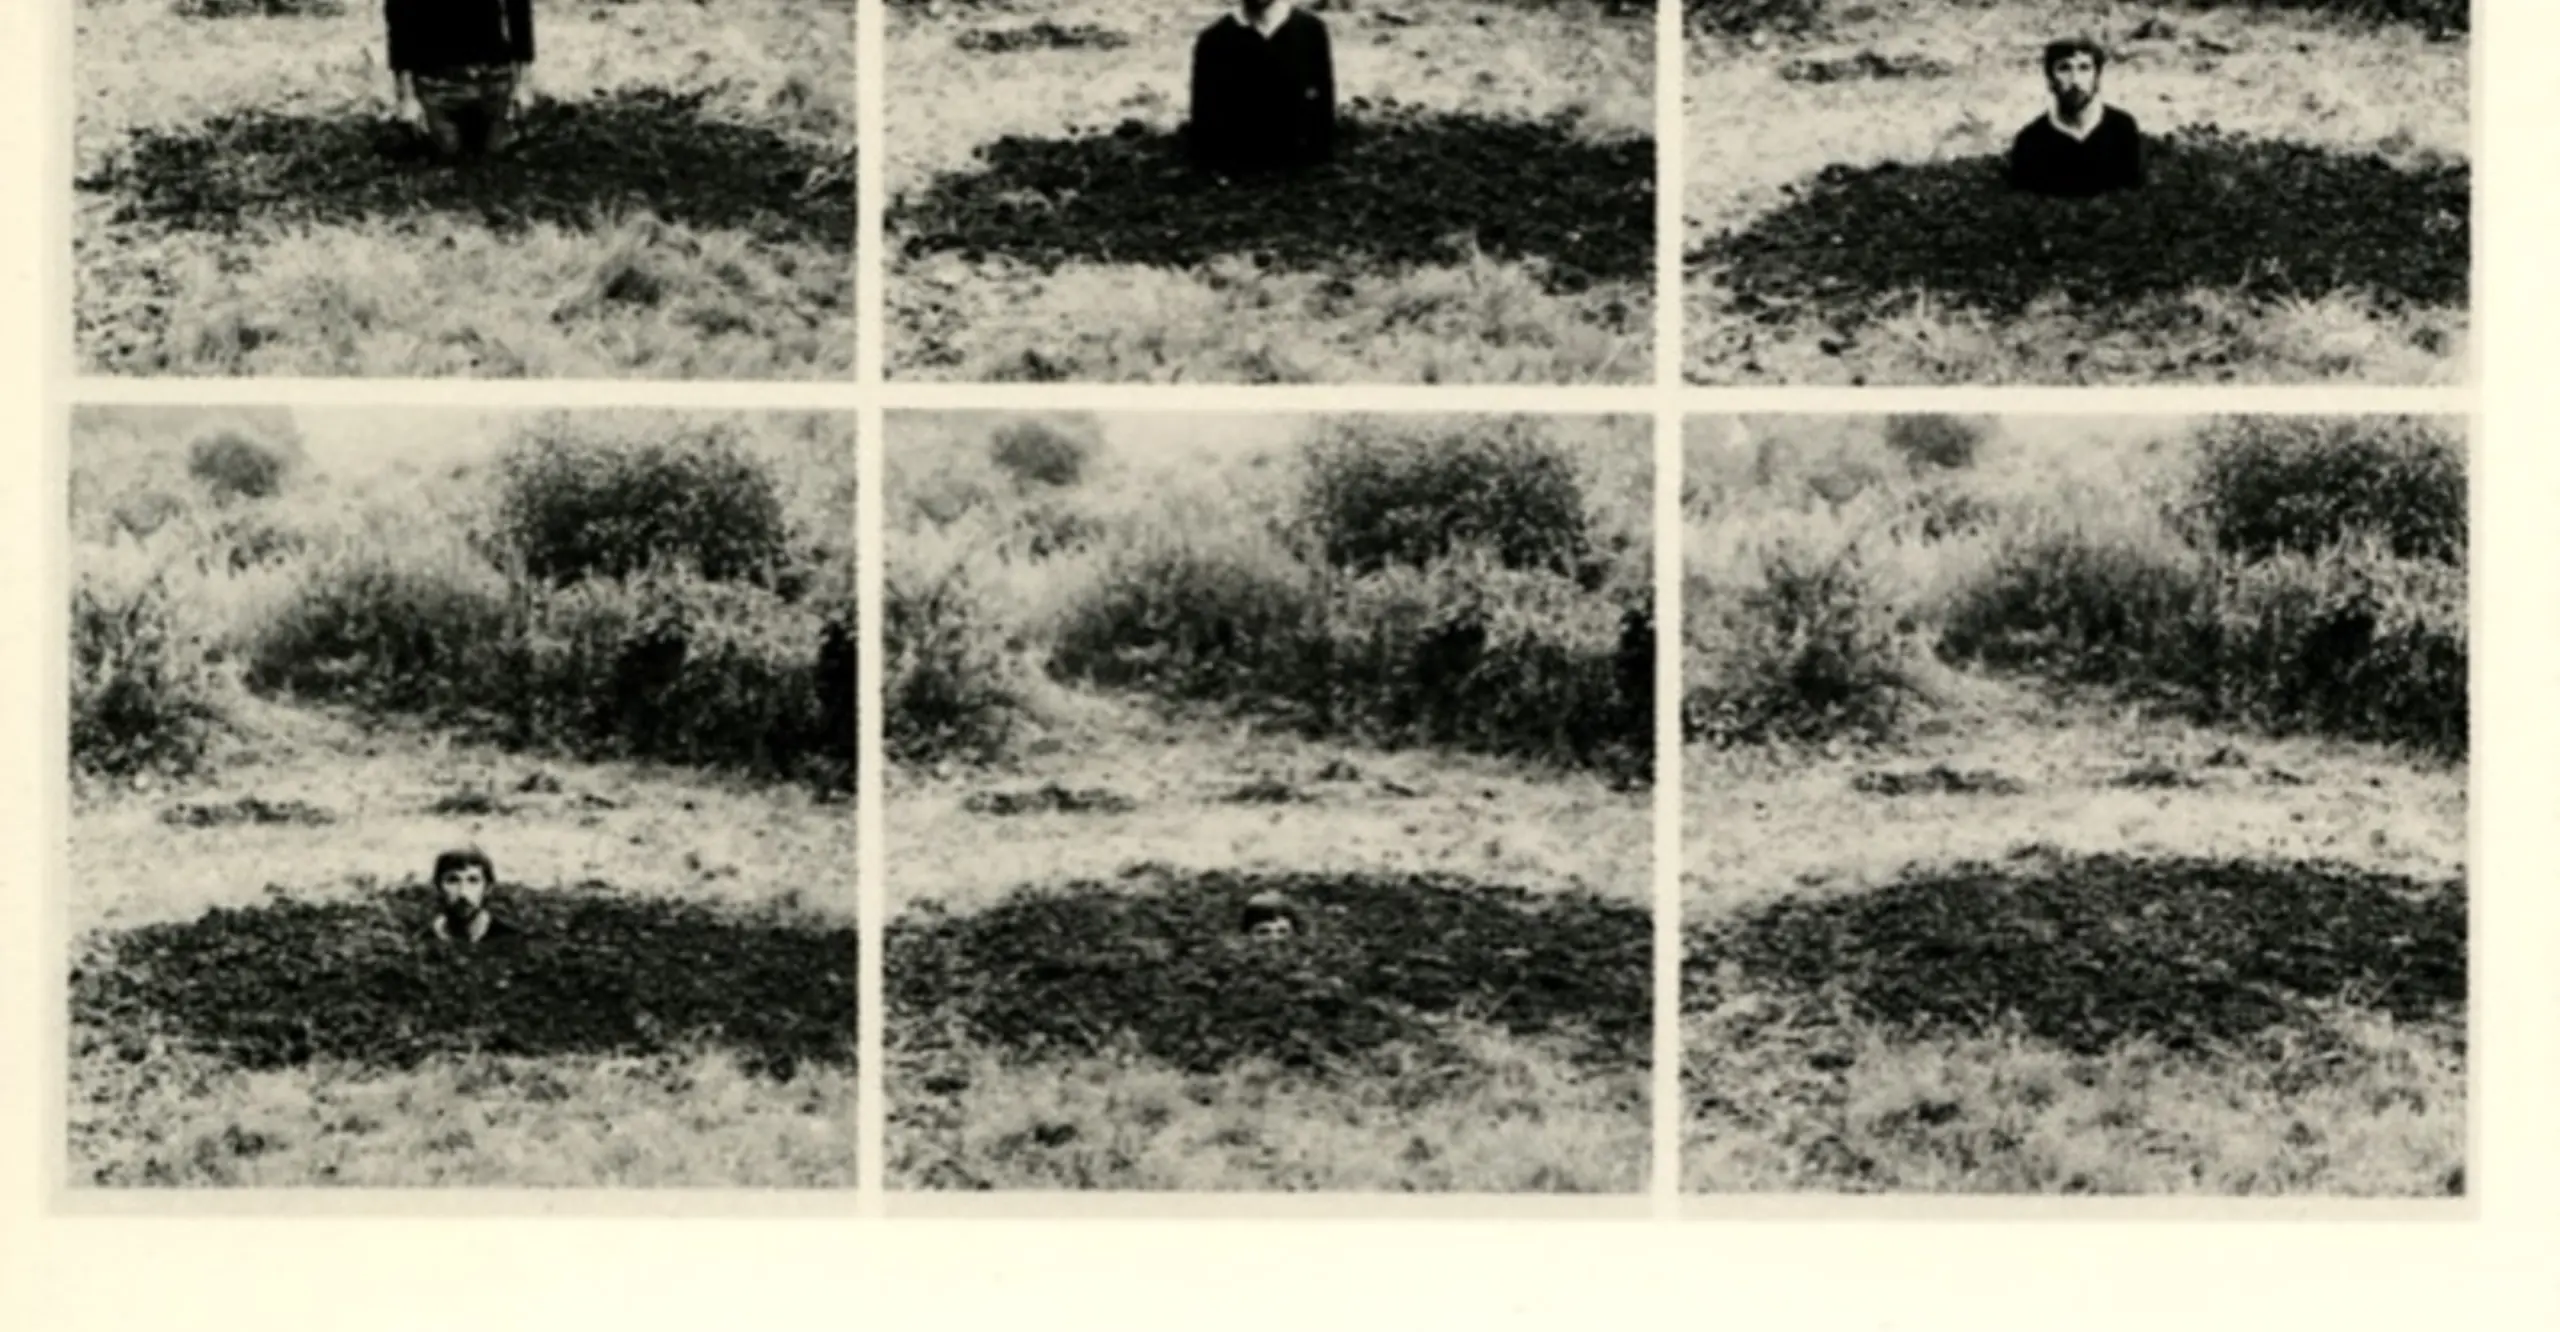 PV Card for Photography As Performance. Courtesy The Photographers' Gallery Archive, image detail from Keith Arnatt, Self Burial (Television Interference Project), 1969 